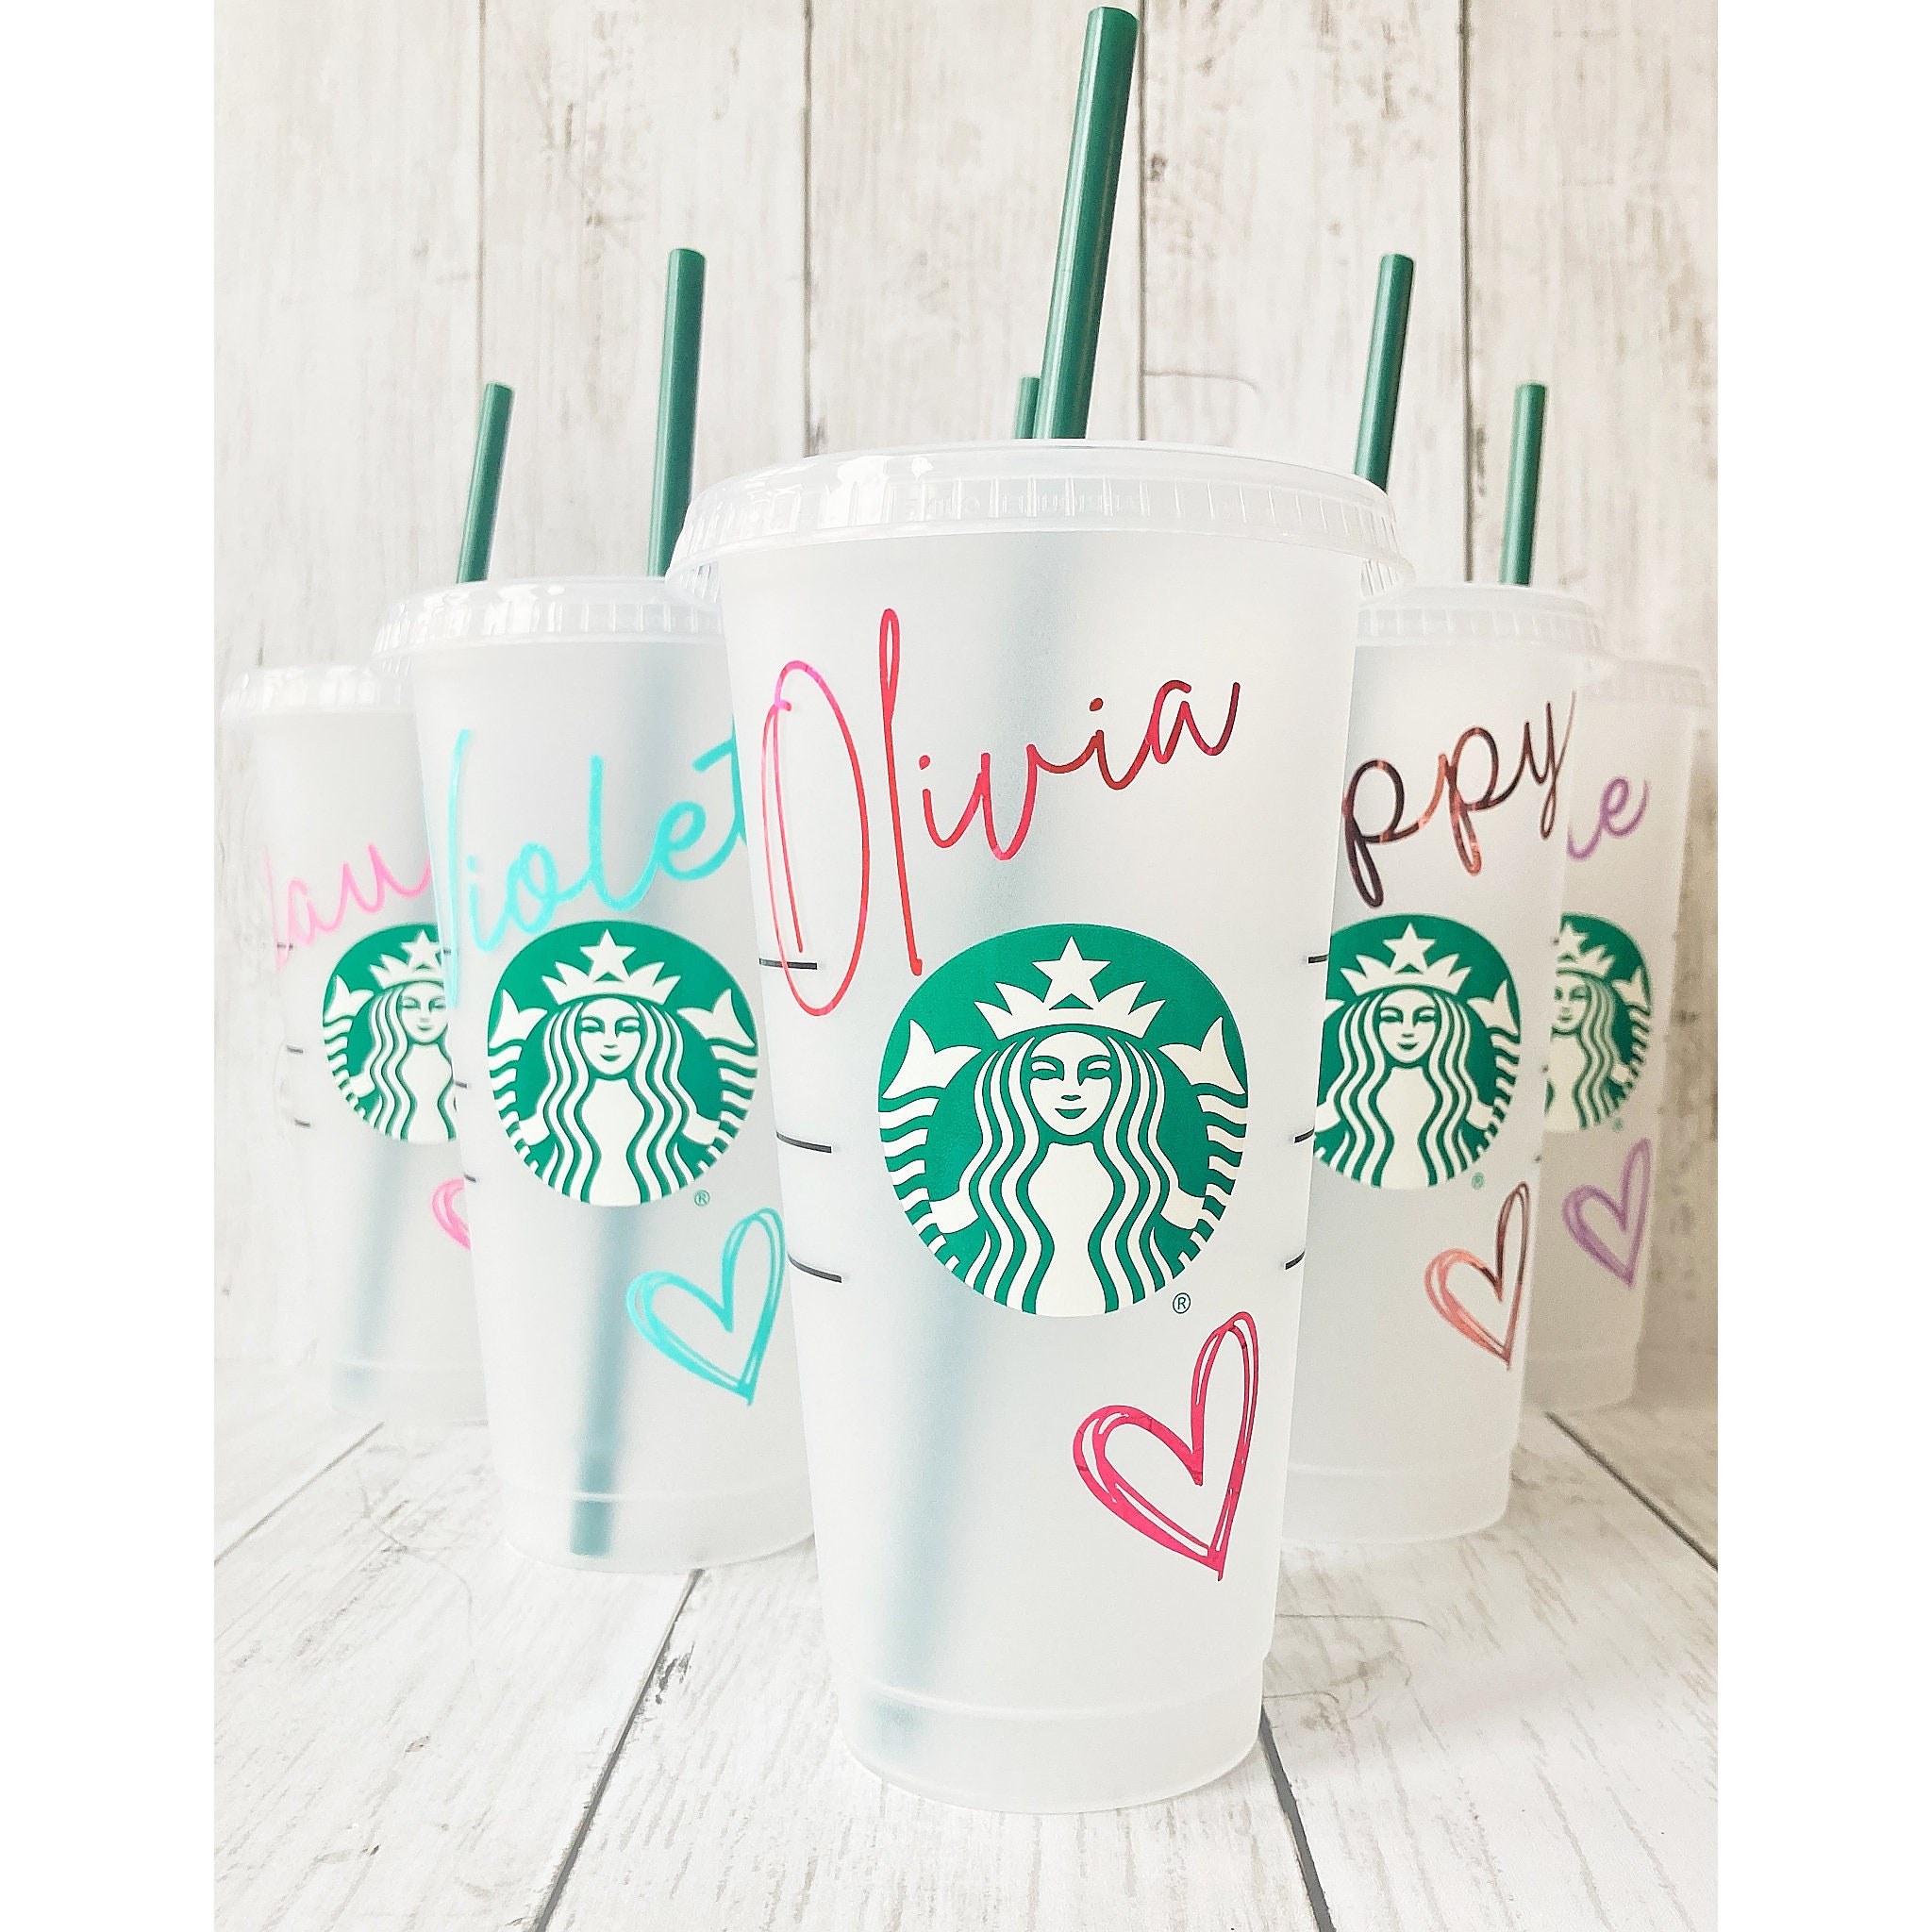 Personalised starbucks cold cup with green straw. - Depop